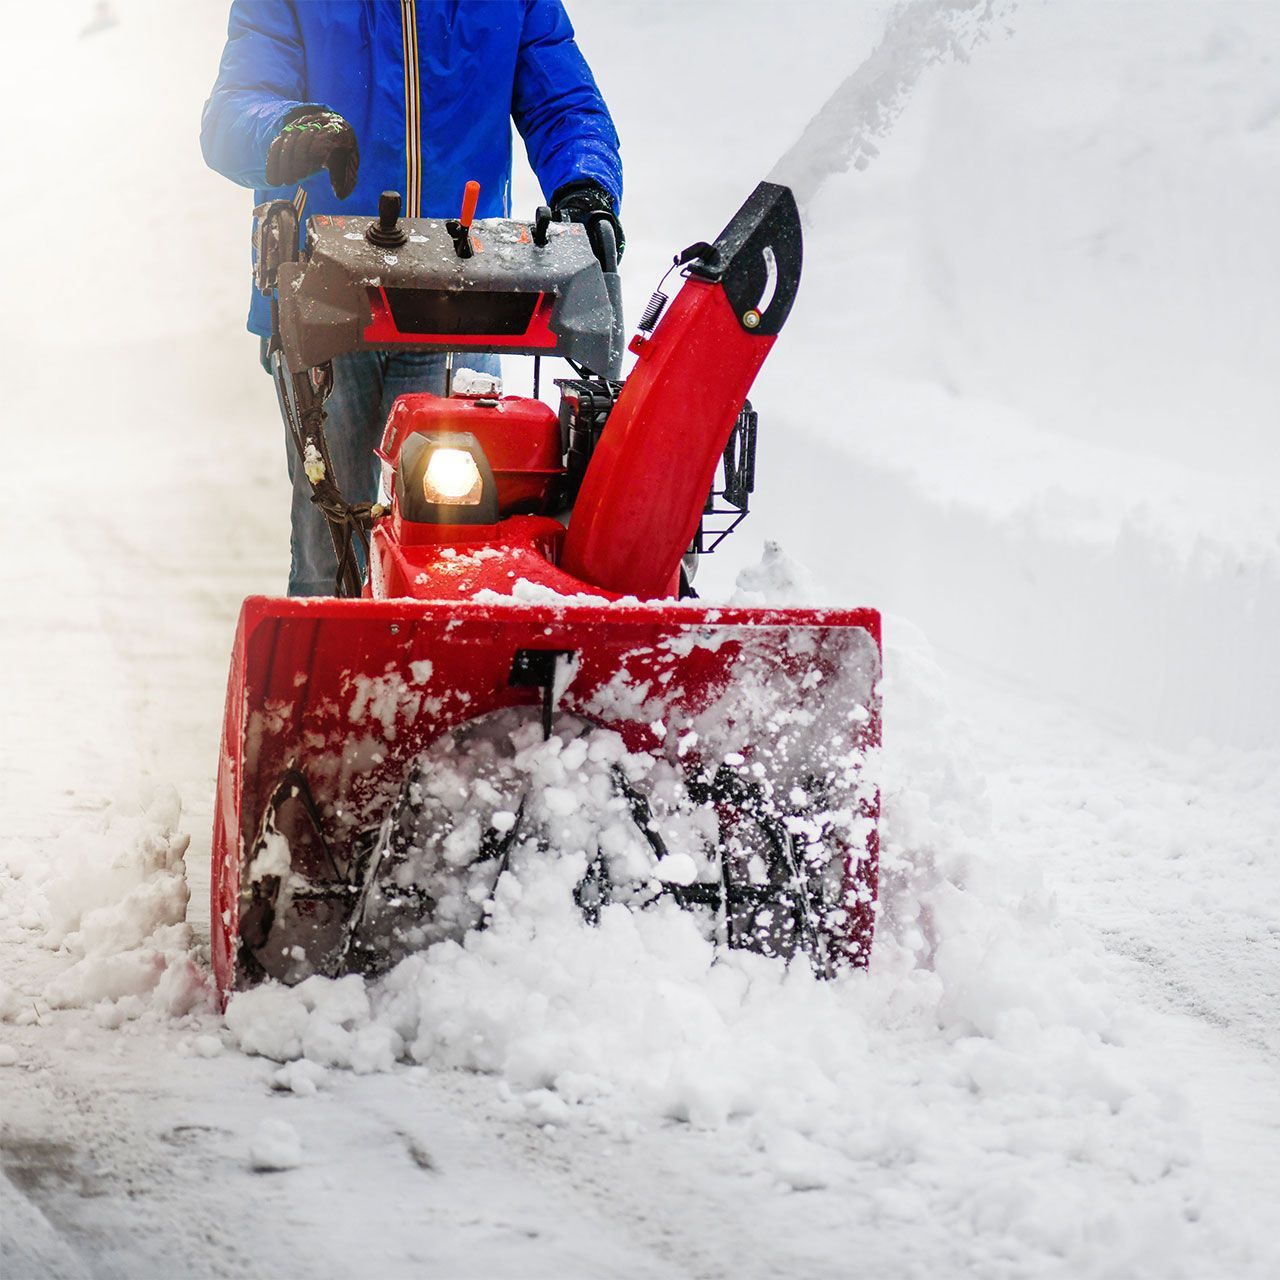 A man is using a snow blower to clear snow from a sidewalk.